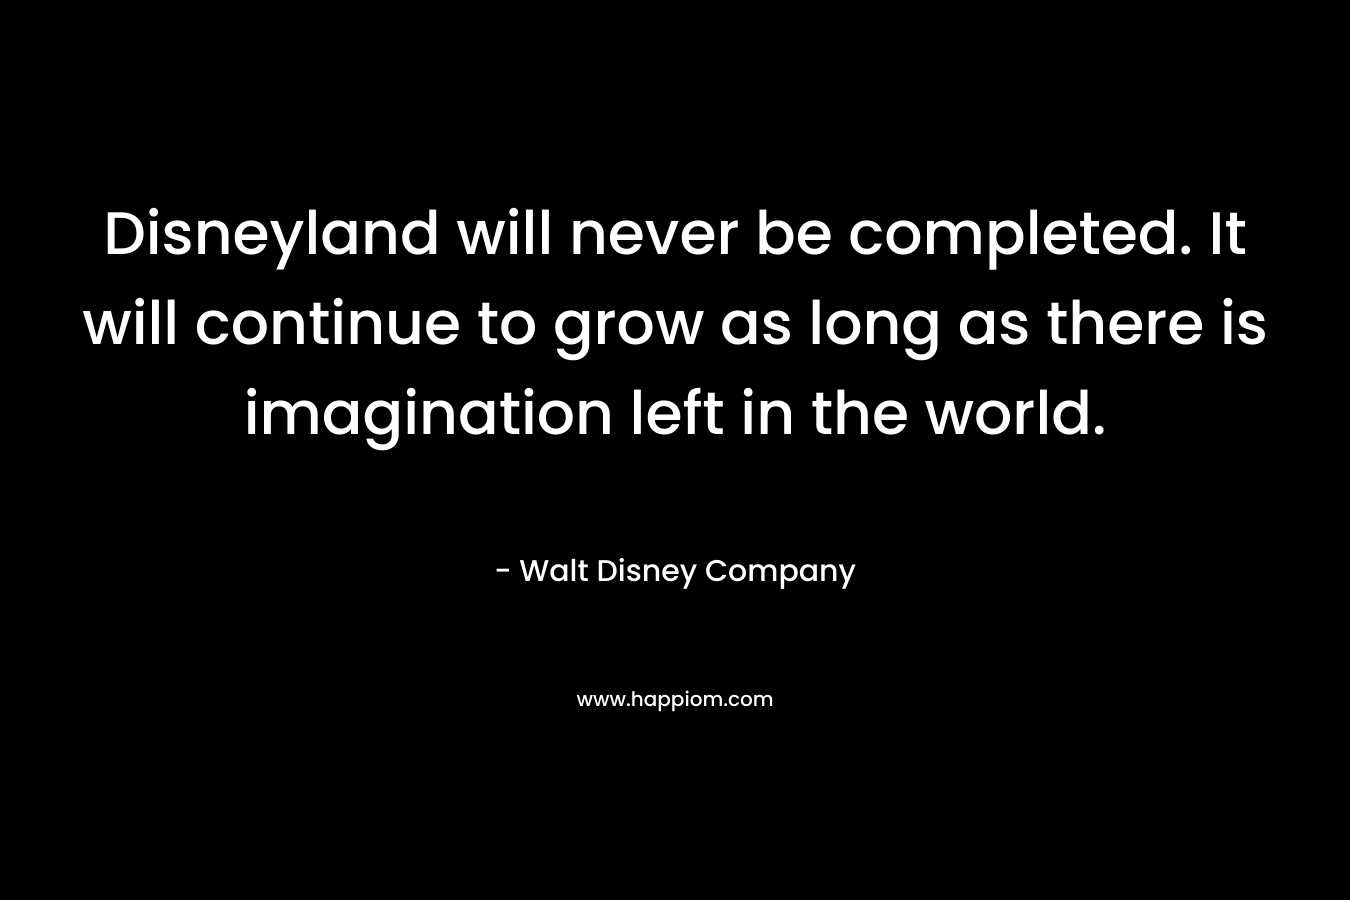 Disneyland will never be completed. It will continue to grow as long as there is imagination left in the world. – Walt Disney Company